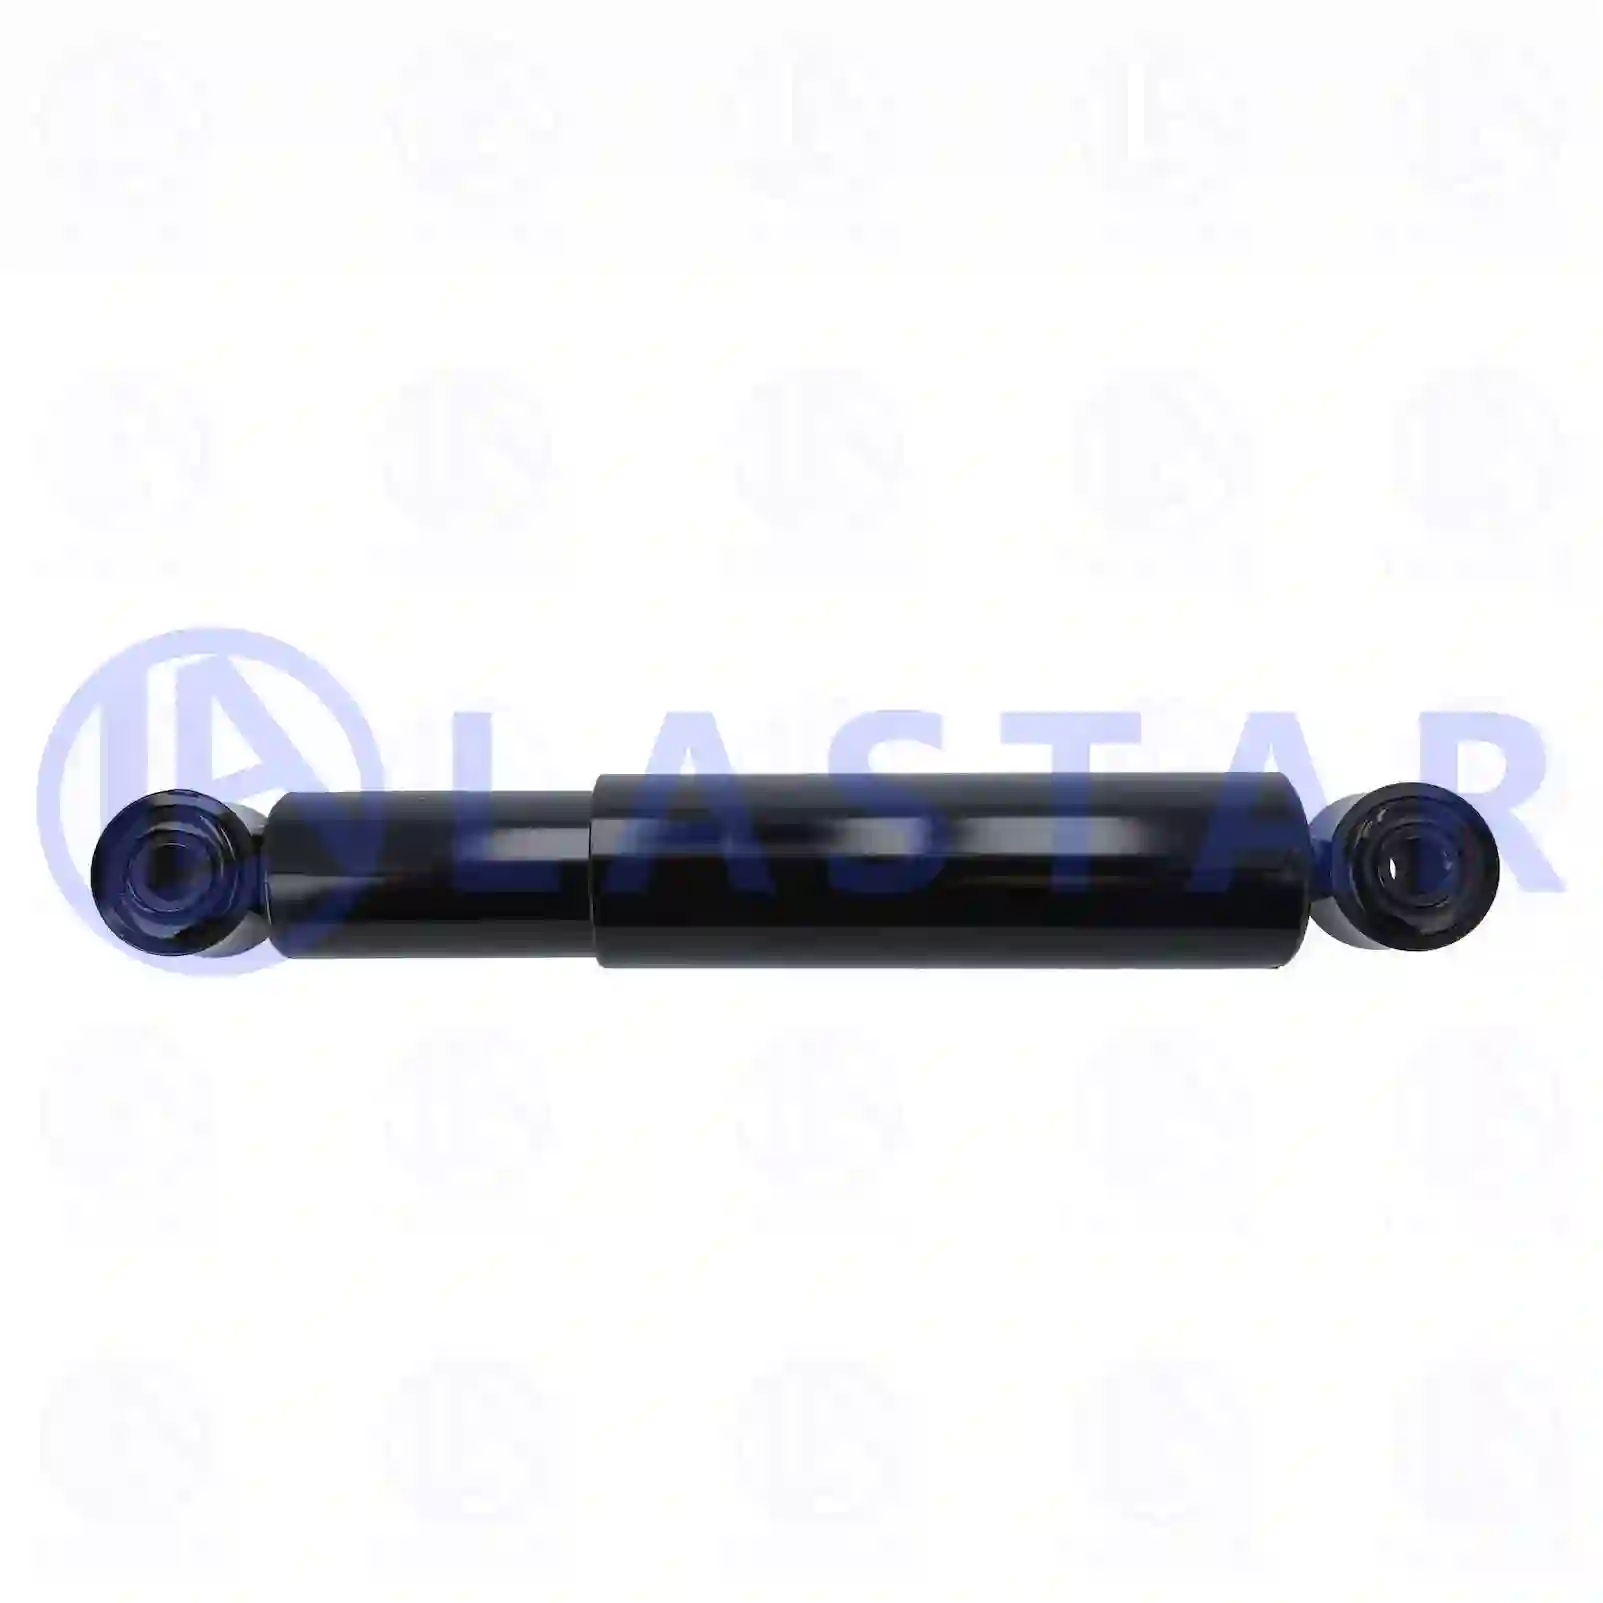 Shock absorber, 77727630, 41033039, 41214700, 41225418, 41296211, ZG41638-0008, ||  77727630 Lastar Spare Part | Truck Spare Parts, Auotomotive Spare Parts Shock absorber, 77727630, 41033039, 41214700, 41225418, 41296211, ZG41638-0008, ||  77727630 Lastar Spare Part | Truck Spare Parts, Auotomotive Spare Parts